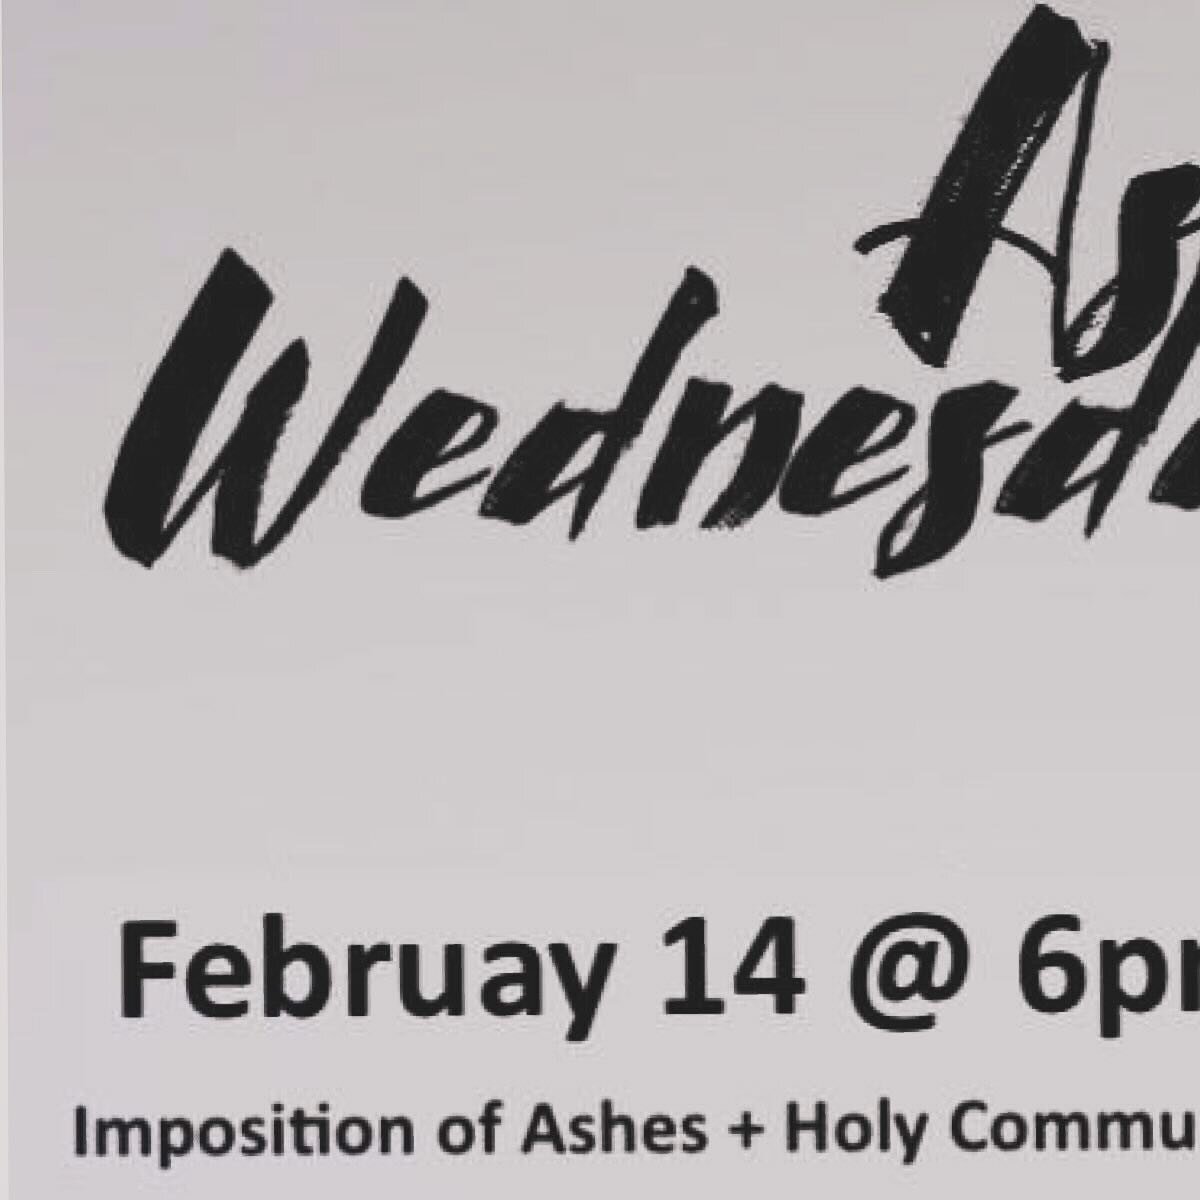 Ash Wednesday marks the beginning of Lent and our 40-day journey to Jesus&rsquo; cross and empty tomb. The Imposition of Ashes will be offered at our 6pm service or throughout the day by appointment. Please contact Pastor Bater to arrange a time to m